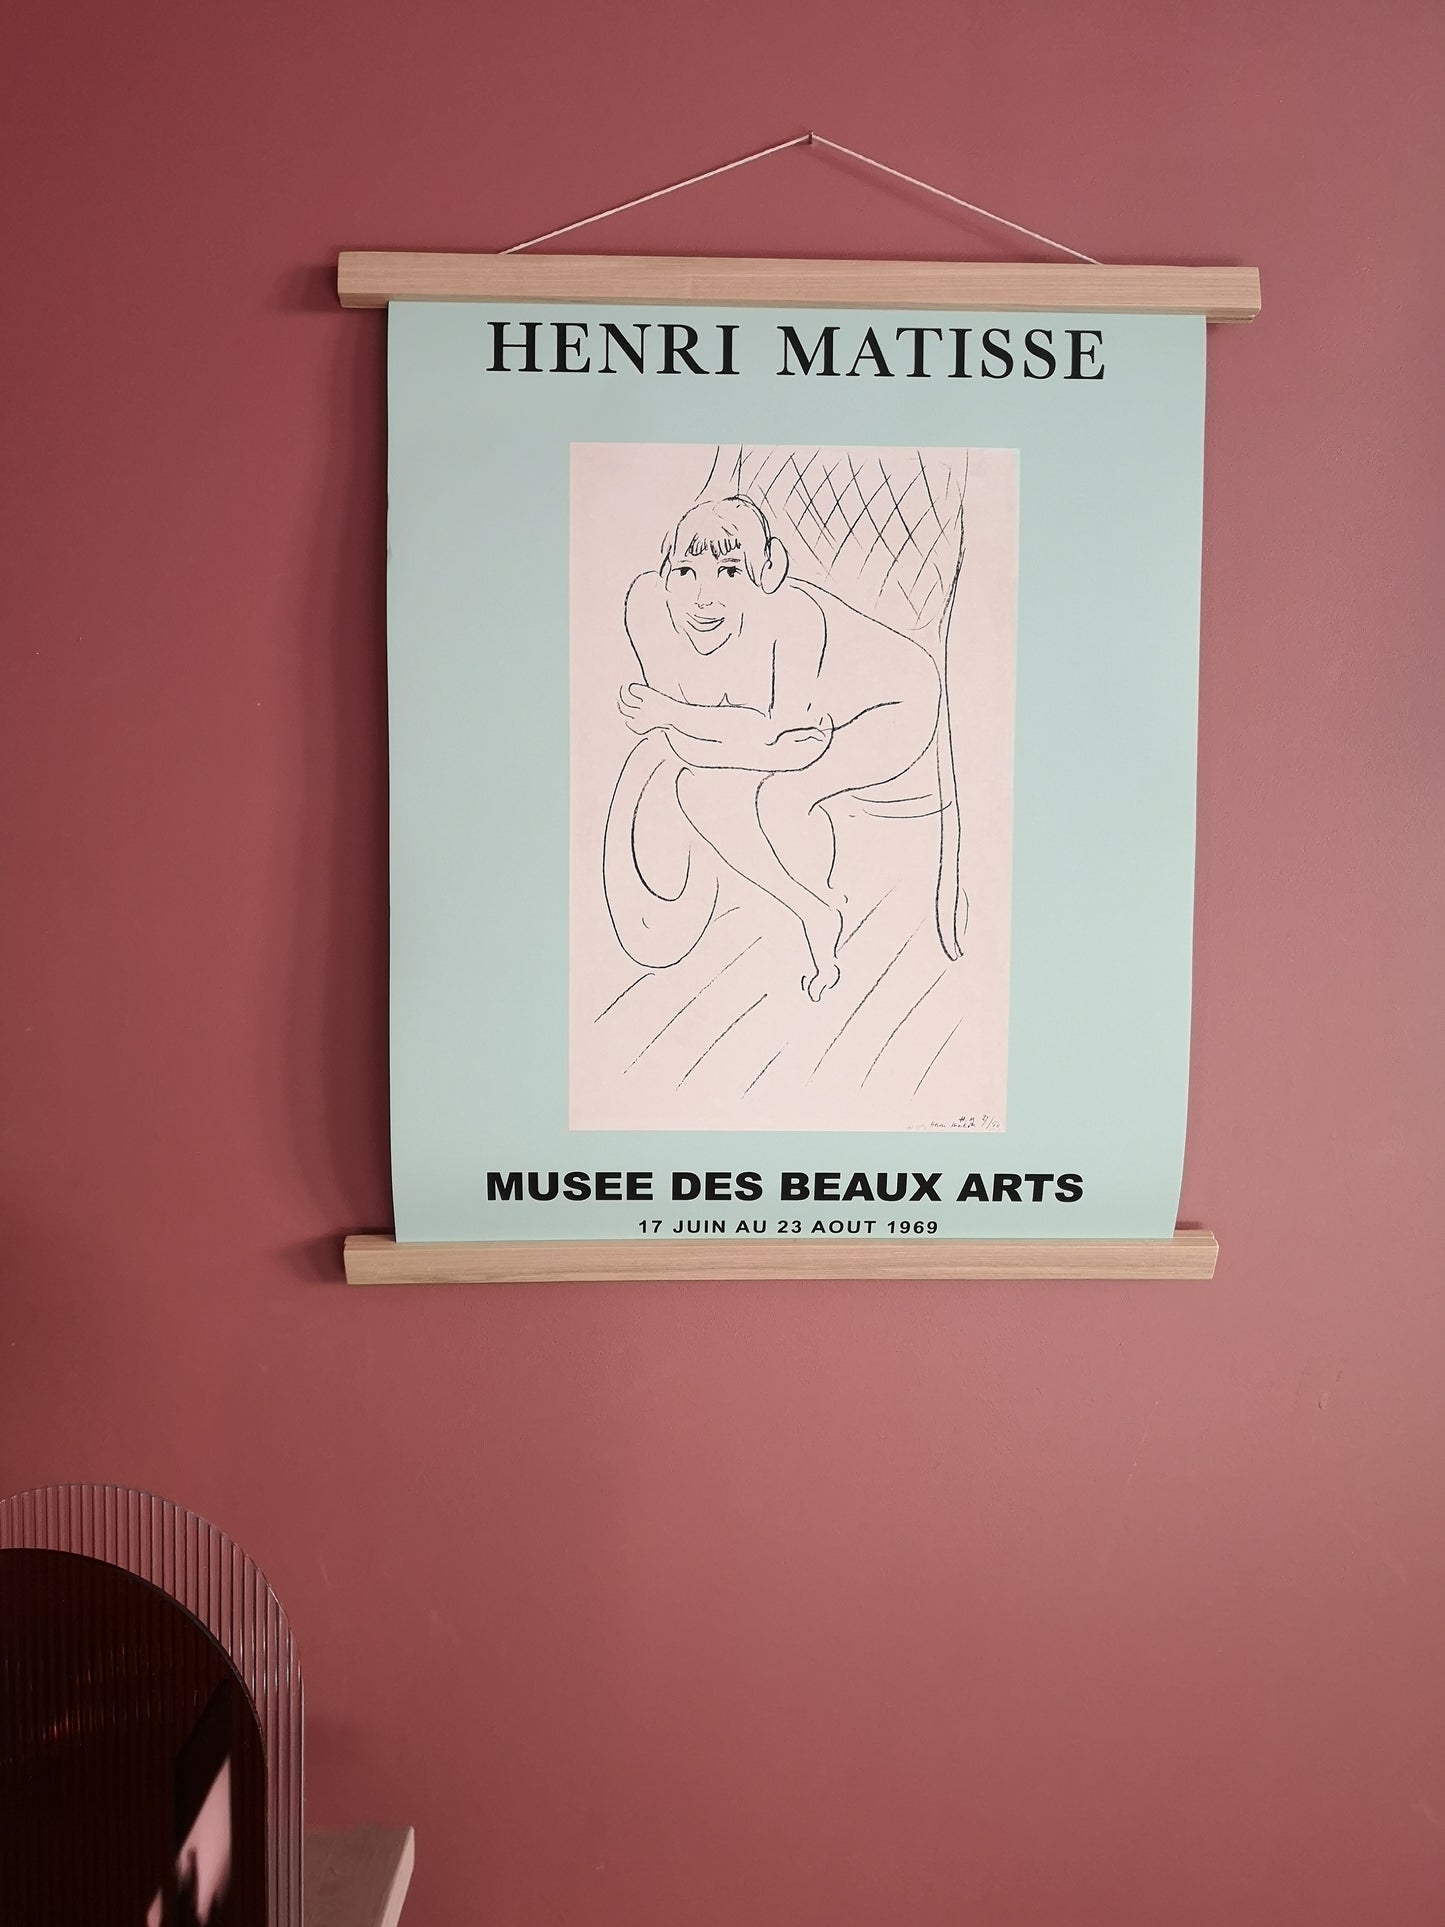 Illustration Matisse menthe - The Printable Concept